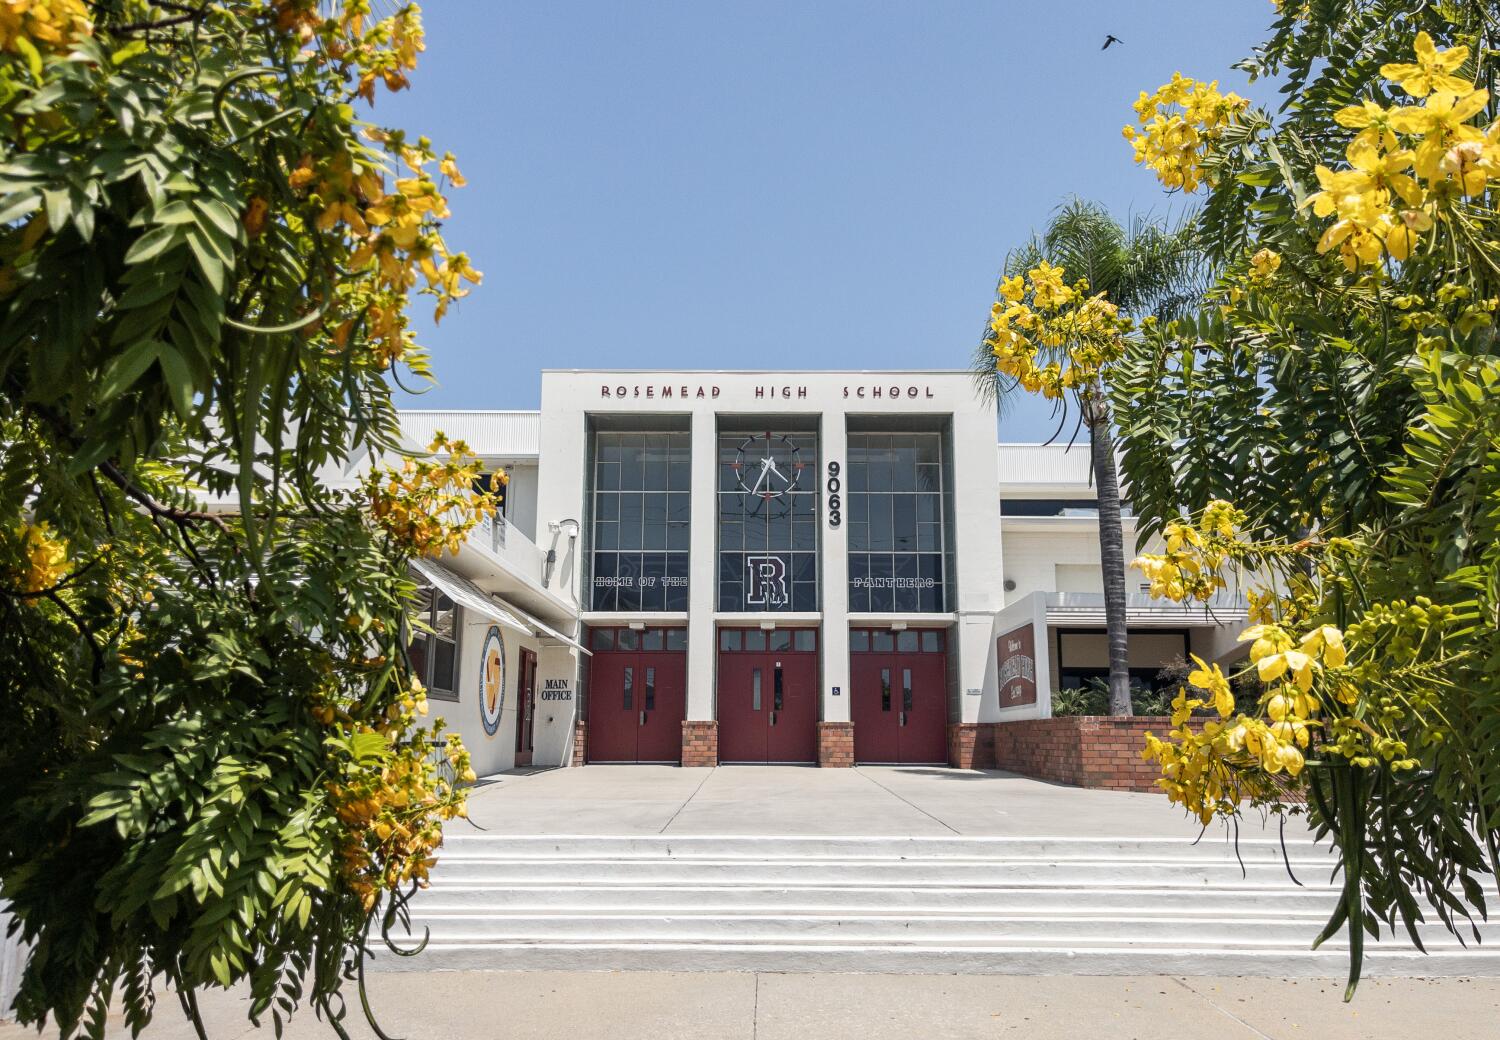 Nine former Rosemead High School students sue, alleging sexual abuse by district employees